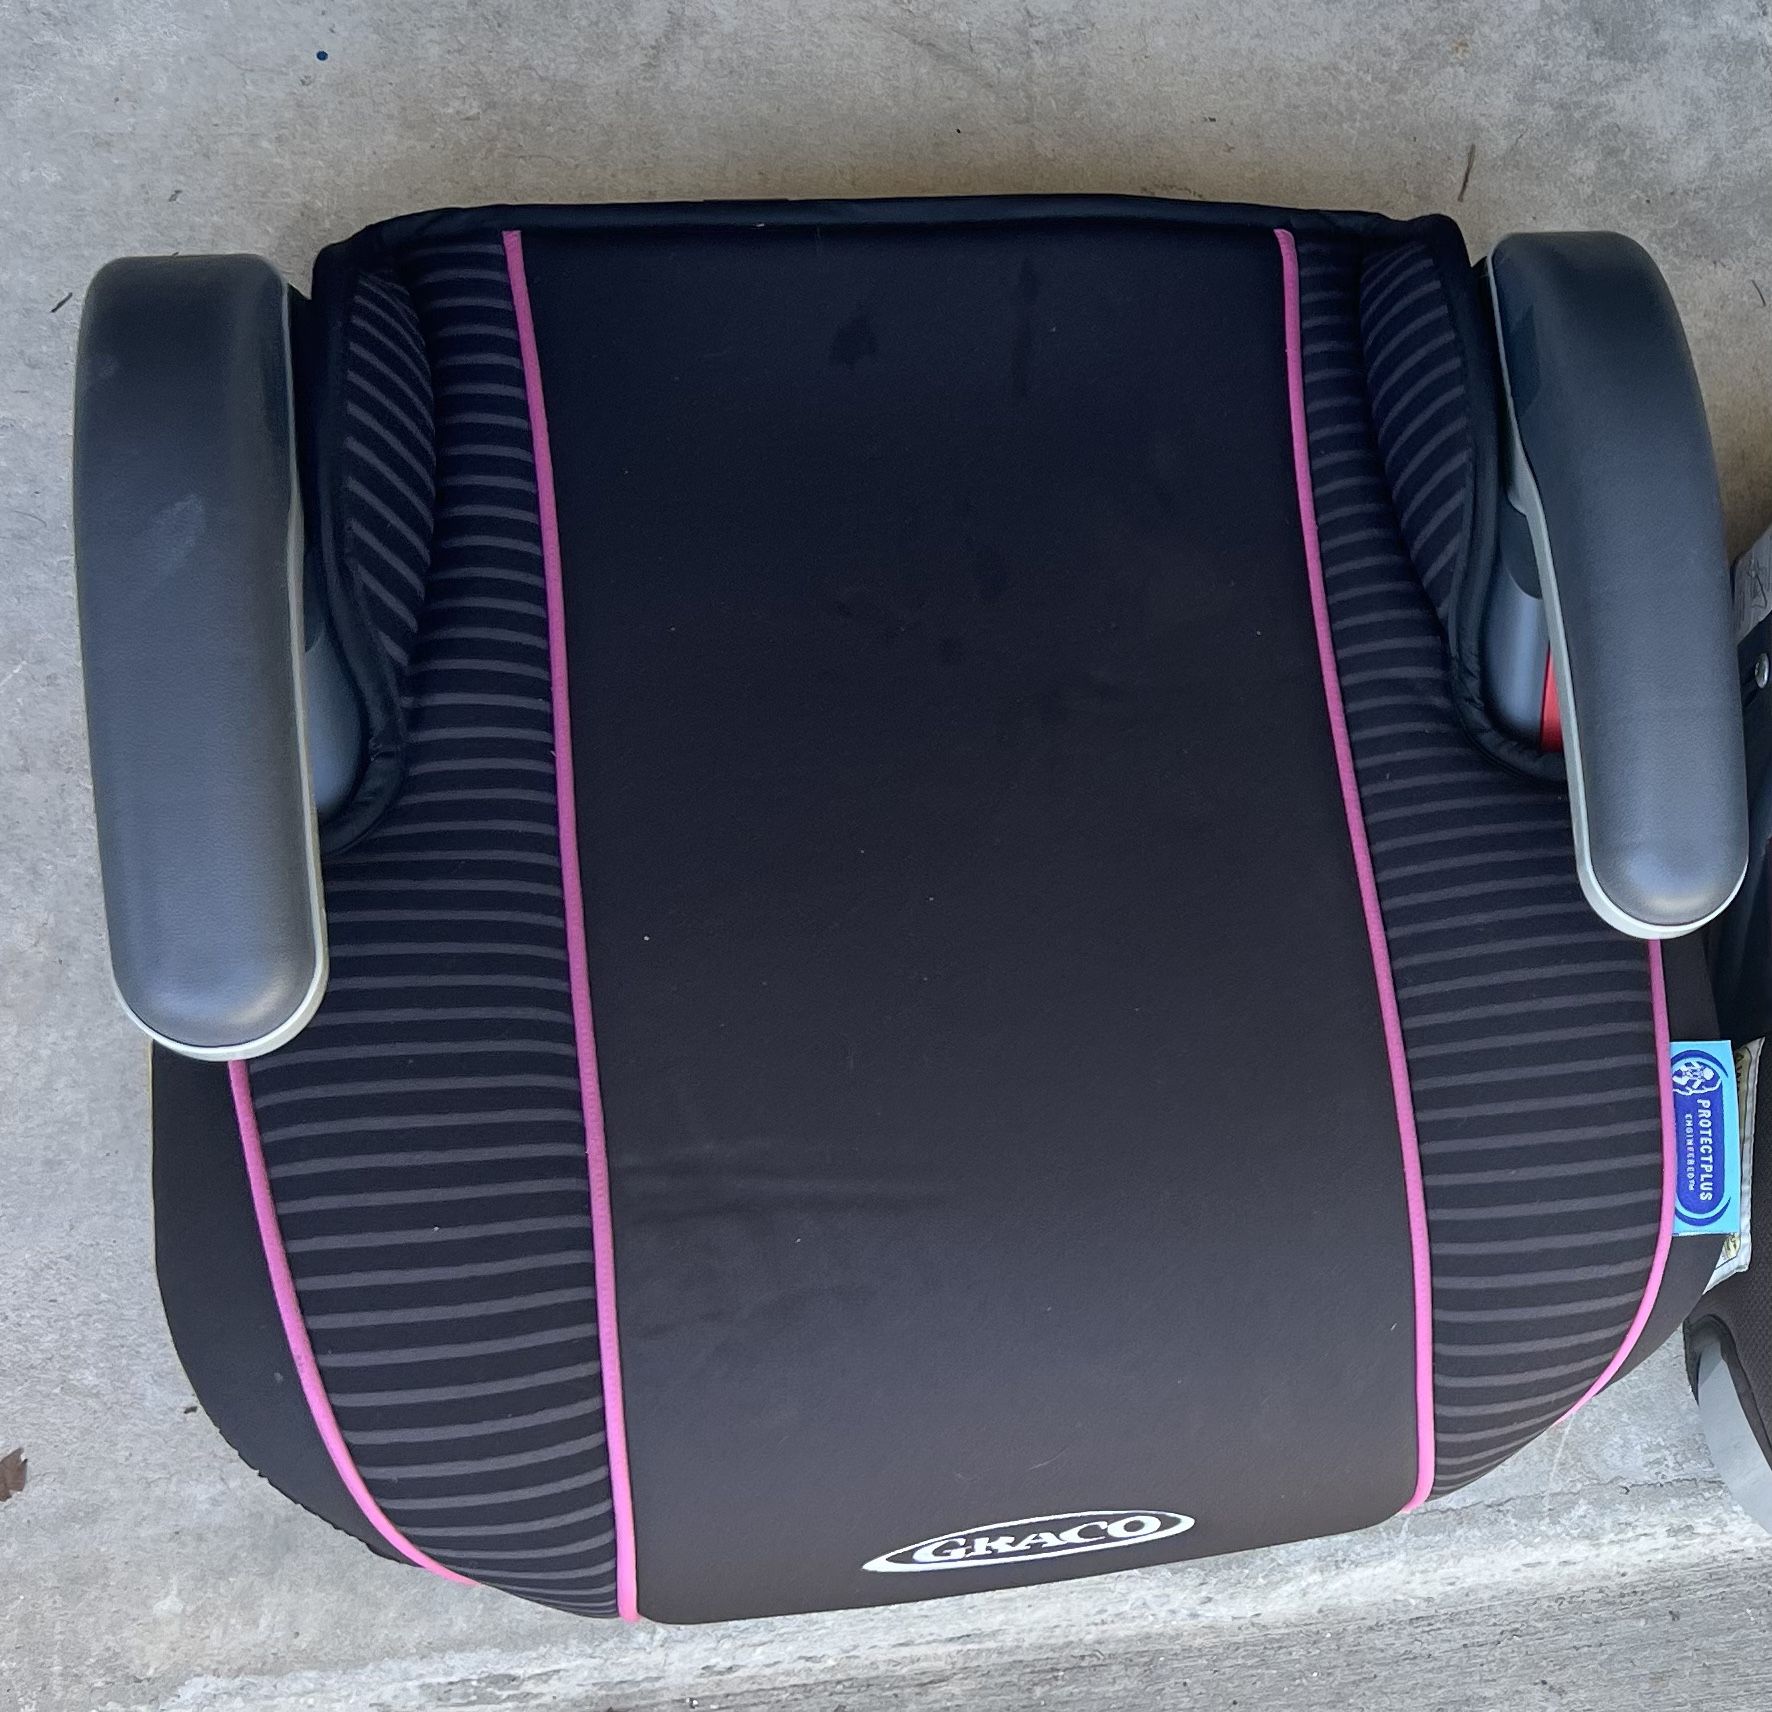 GRACO Kids Backless Booster Seat